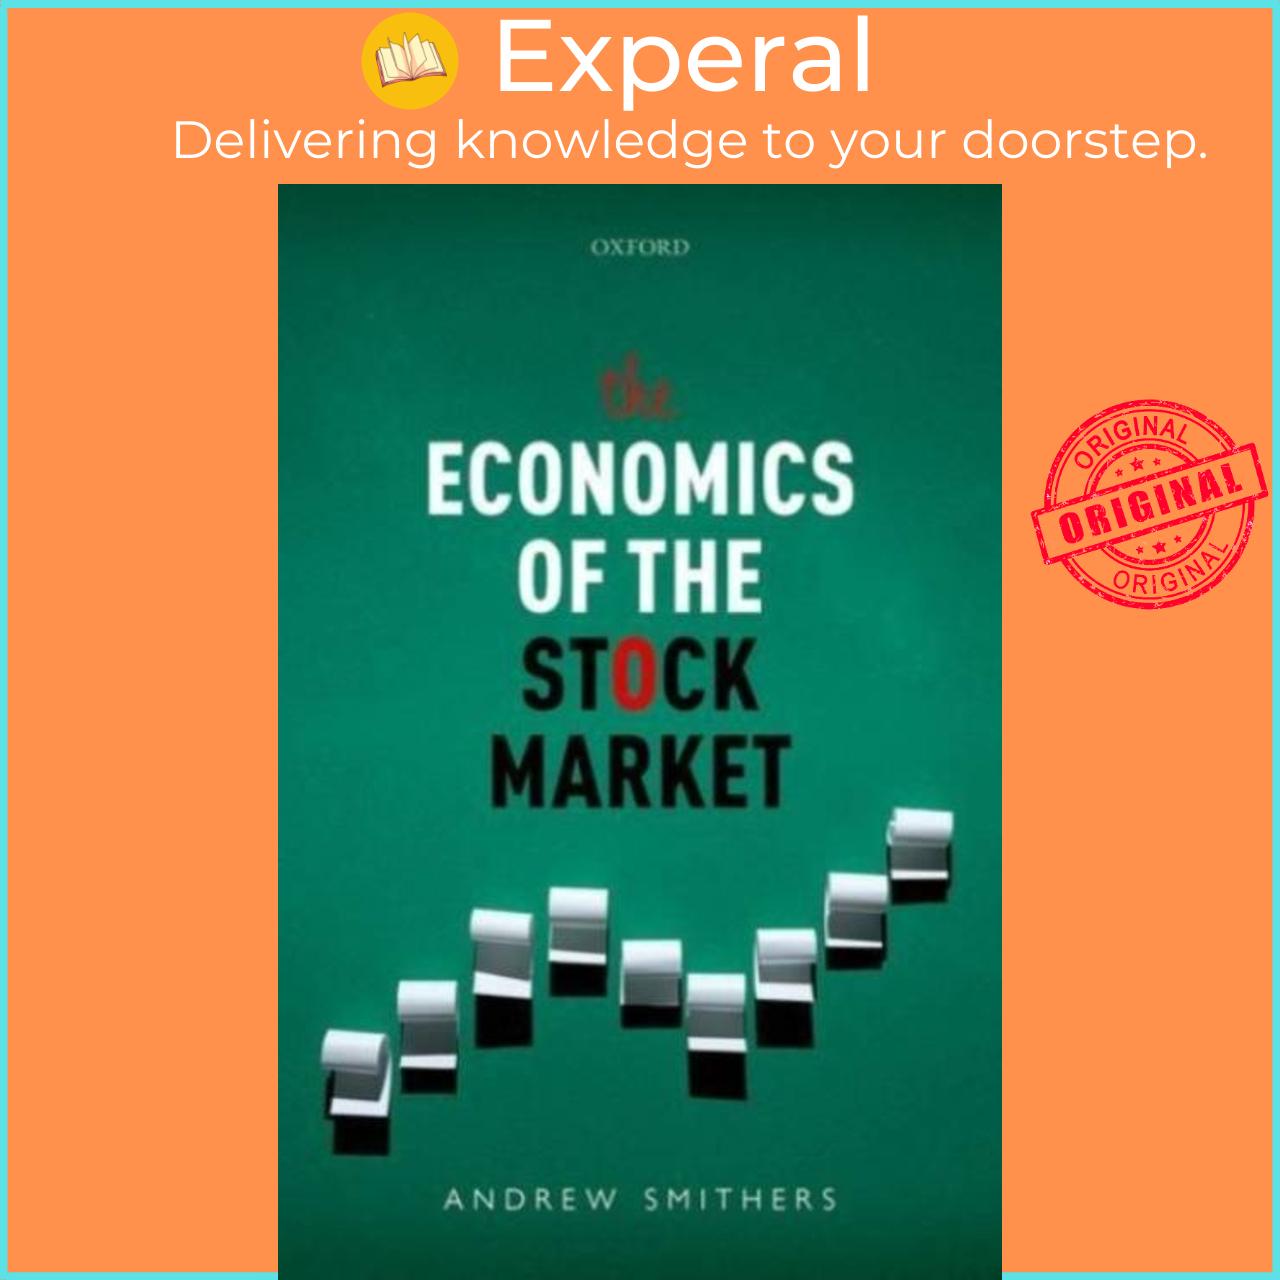 Sách - The Economics of the Stock Market by Andrew Smithers (UK edition, hardcover)